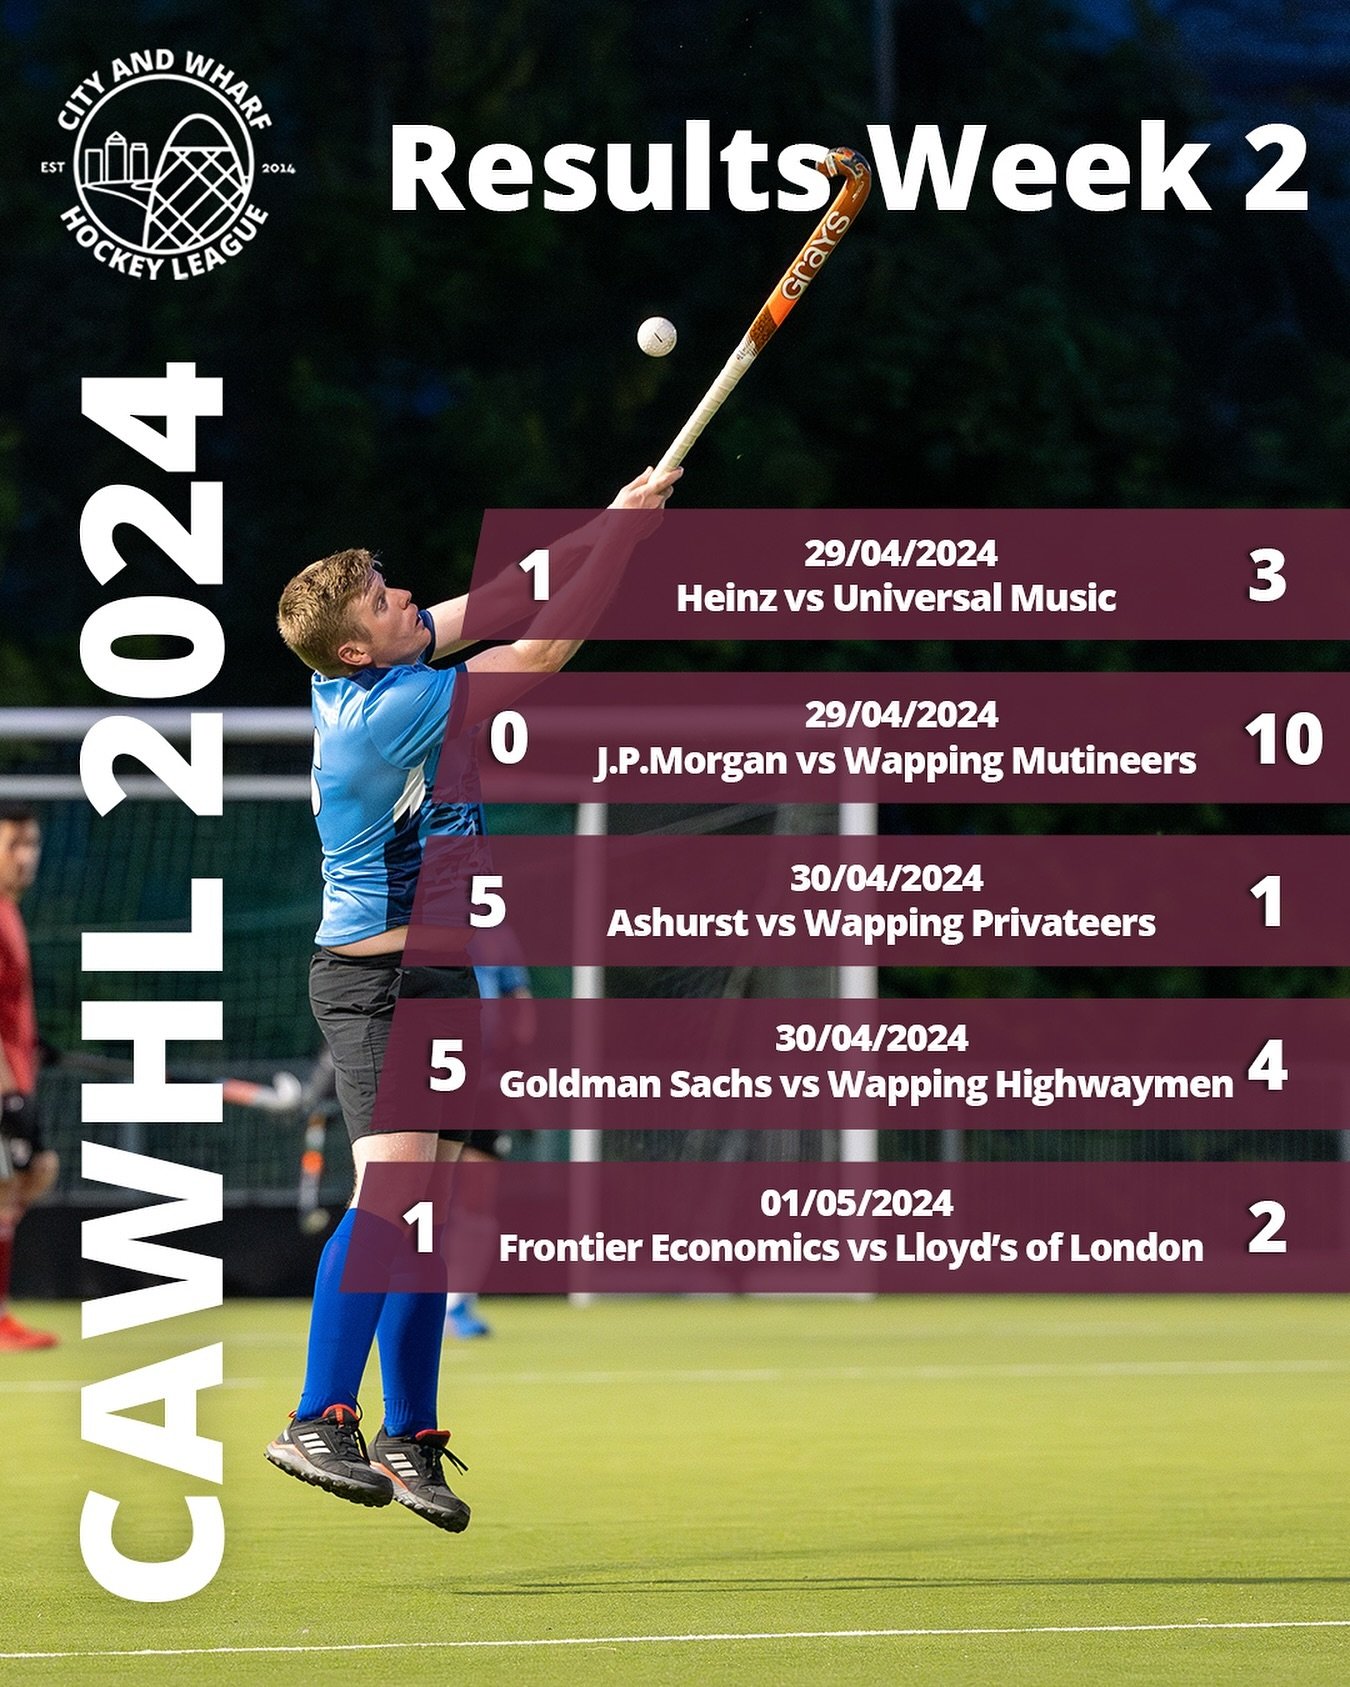 Week 2 results are here 🤝

Bank holiday weekend will mean fewer games played next week, stay tuned for fixtures. 

#fieldhockey #hockey #citywharfhockey #londonhockey #londonhockeyleague #englandhockey #gbhockey #mixedhockey #corporateleague #corpor